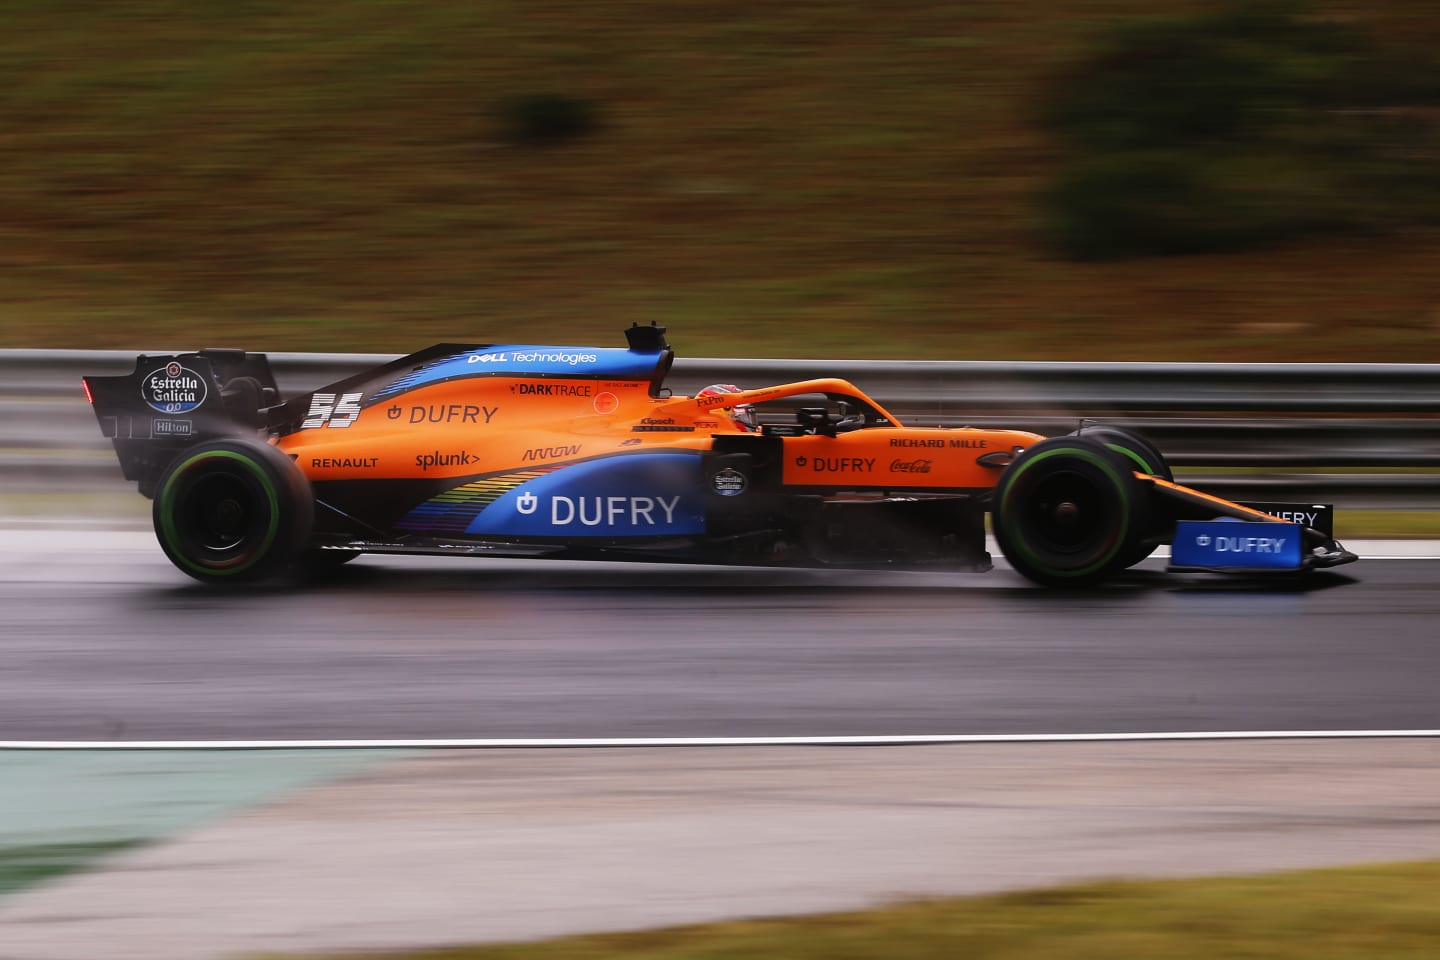 BUDAPEST, HUNGARY - JULY 17: Carlos Sainz of Spain driving the (55) McLaren F1 Team MCL35 Renault on track during practice for the F1 Grand Prix of Hungary at Hungaroring on July 17, 2020 in Budapest, Hungary. (Photo by Darko Bandic/Pool via Getty Images)